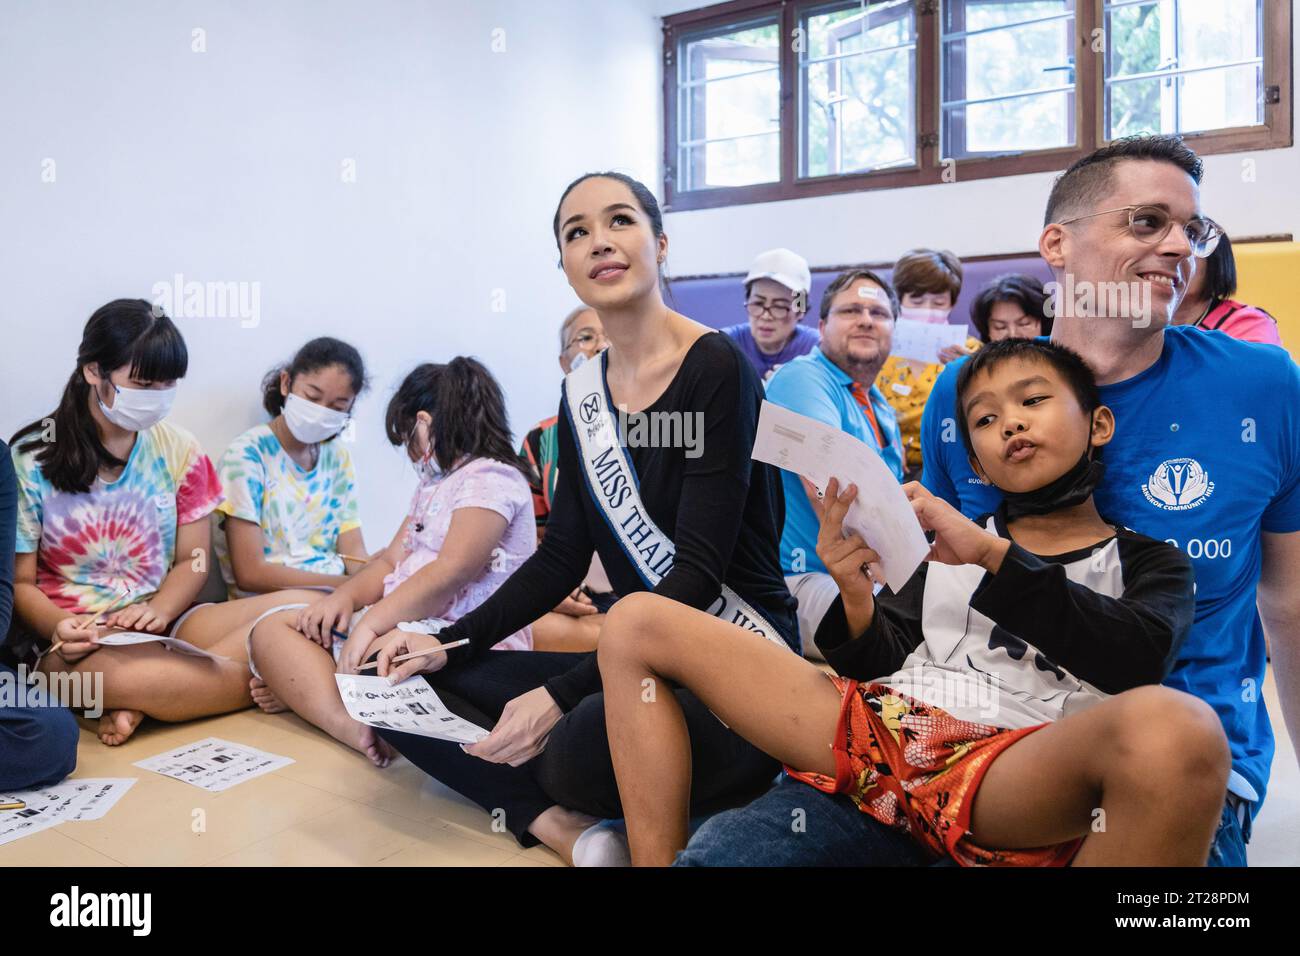 Bangkok, Thailand. 14th Oct, 2023. Tharina Botes, Miss Thailand World 2023 is seen during a free English program to help the children of Klong Toei Bangkok's slum at the Bangkok Community Help Foundation Learning and Development Center, at Klong Toei, in Bangkok. Miss Thailand World 2023, Tharina Botes, mixed Thai-South African heritage joined as a volunteer in a free weekly English program for kids and adults, organized by the Bangkok Community Help Foundation, at Klong Toei, Bangkok's biggest slum. (Photo by Nathalie Jamois/SOPA Images/Sipa USA) Credit: Sipa USA/Alamy Live News Stock Photo